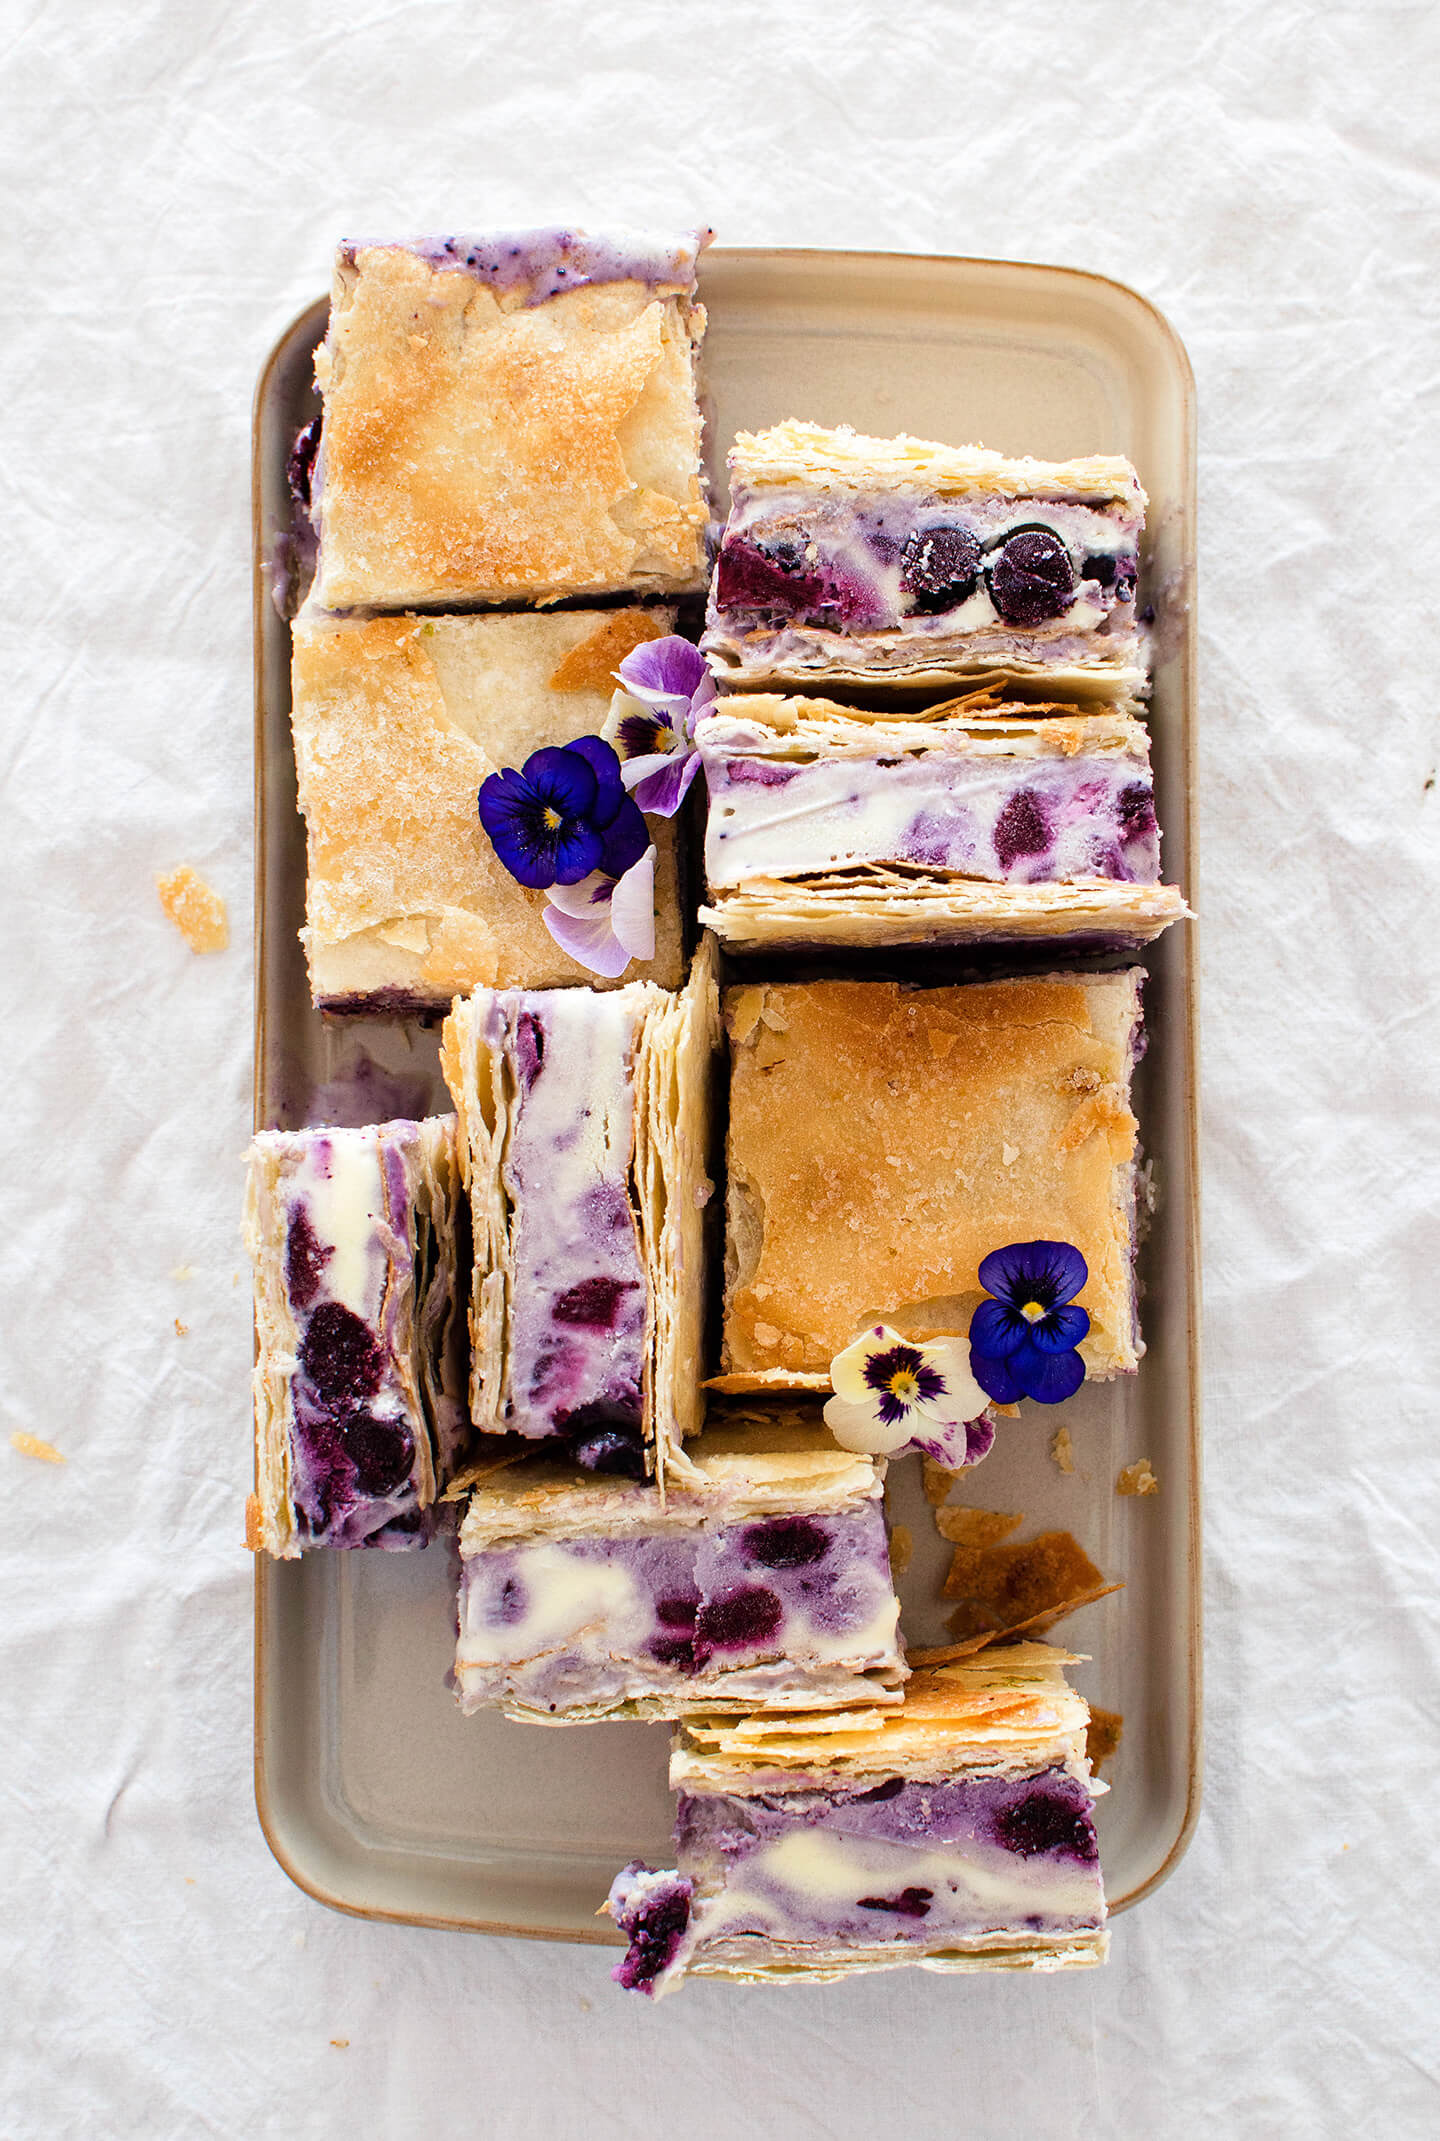 Roasted blueberry phyllo ice cream sandwiches are the perfect summer treat! Pretty to look at and tasty, filled with berries and lime sugar!